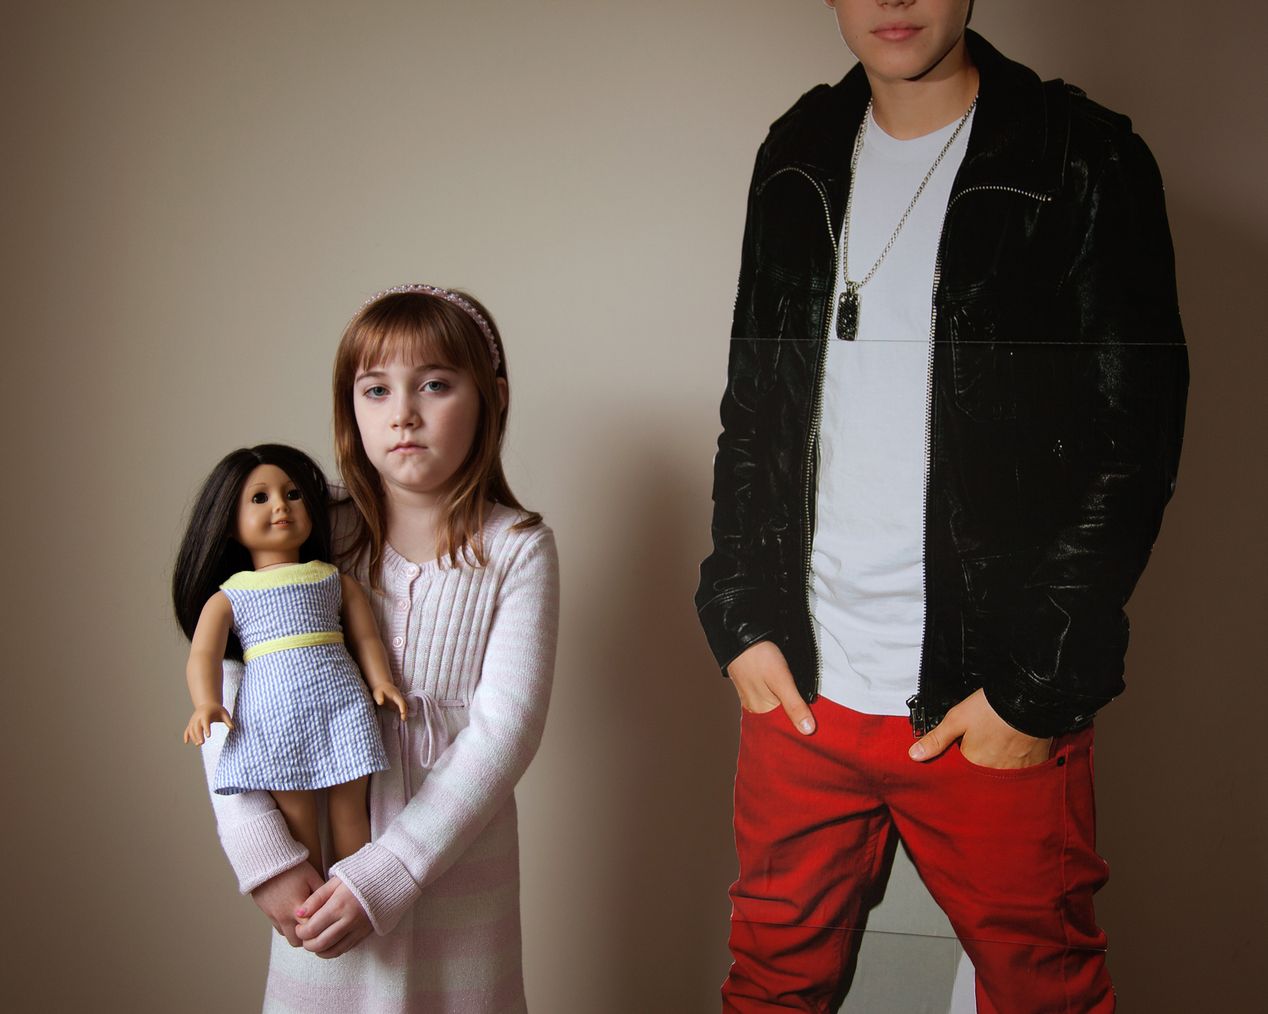 Young girl holding her doll, standing next to a Justin Bieber cutout, environmental portrait photography, Ilona Szwarc, contemporary Los Angeles artist.